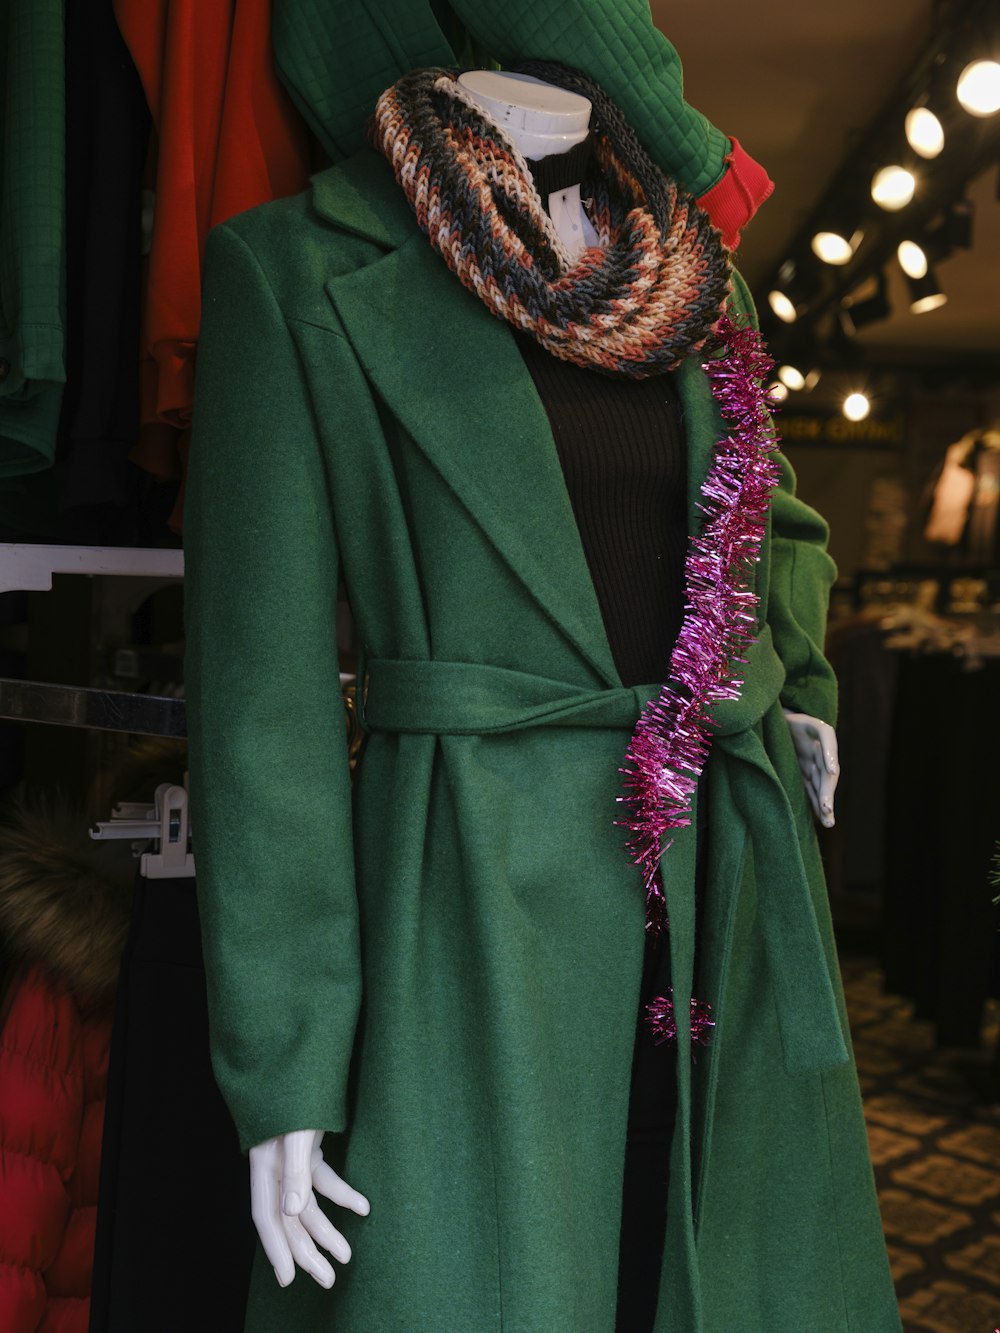 a mannequin dressed in a green coat and scarf